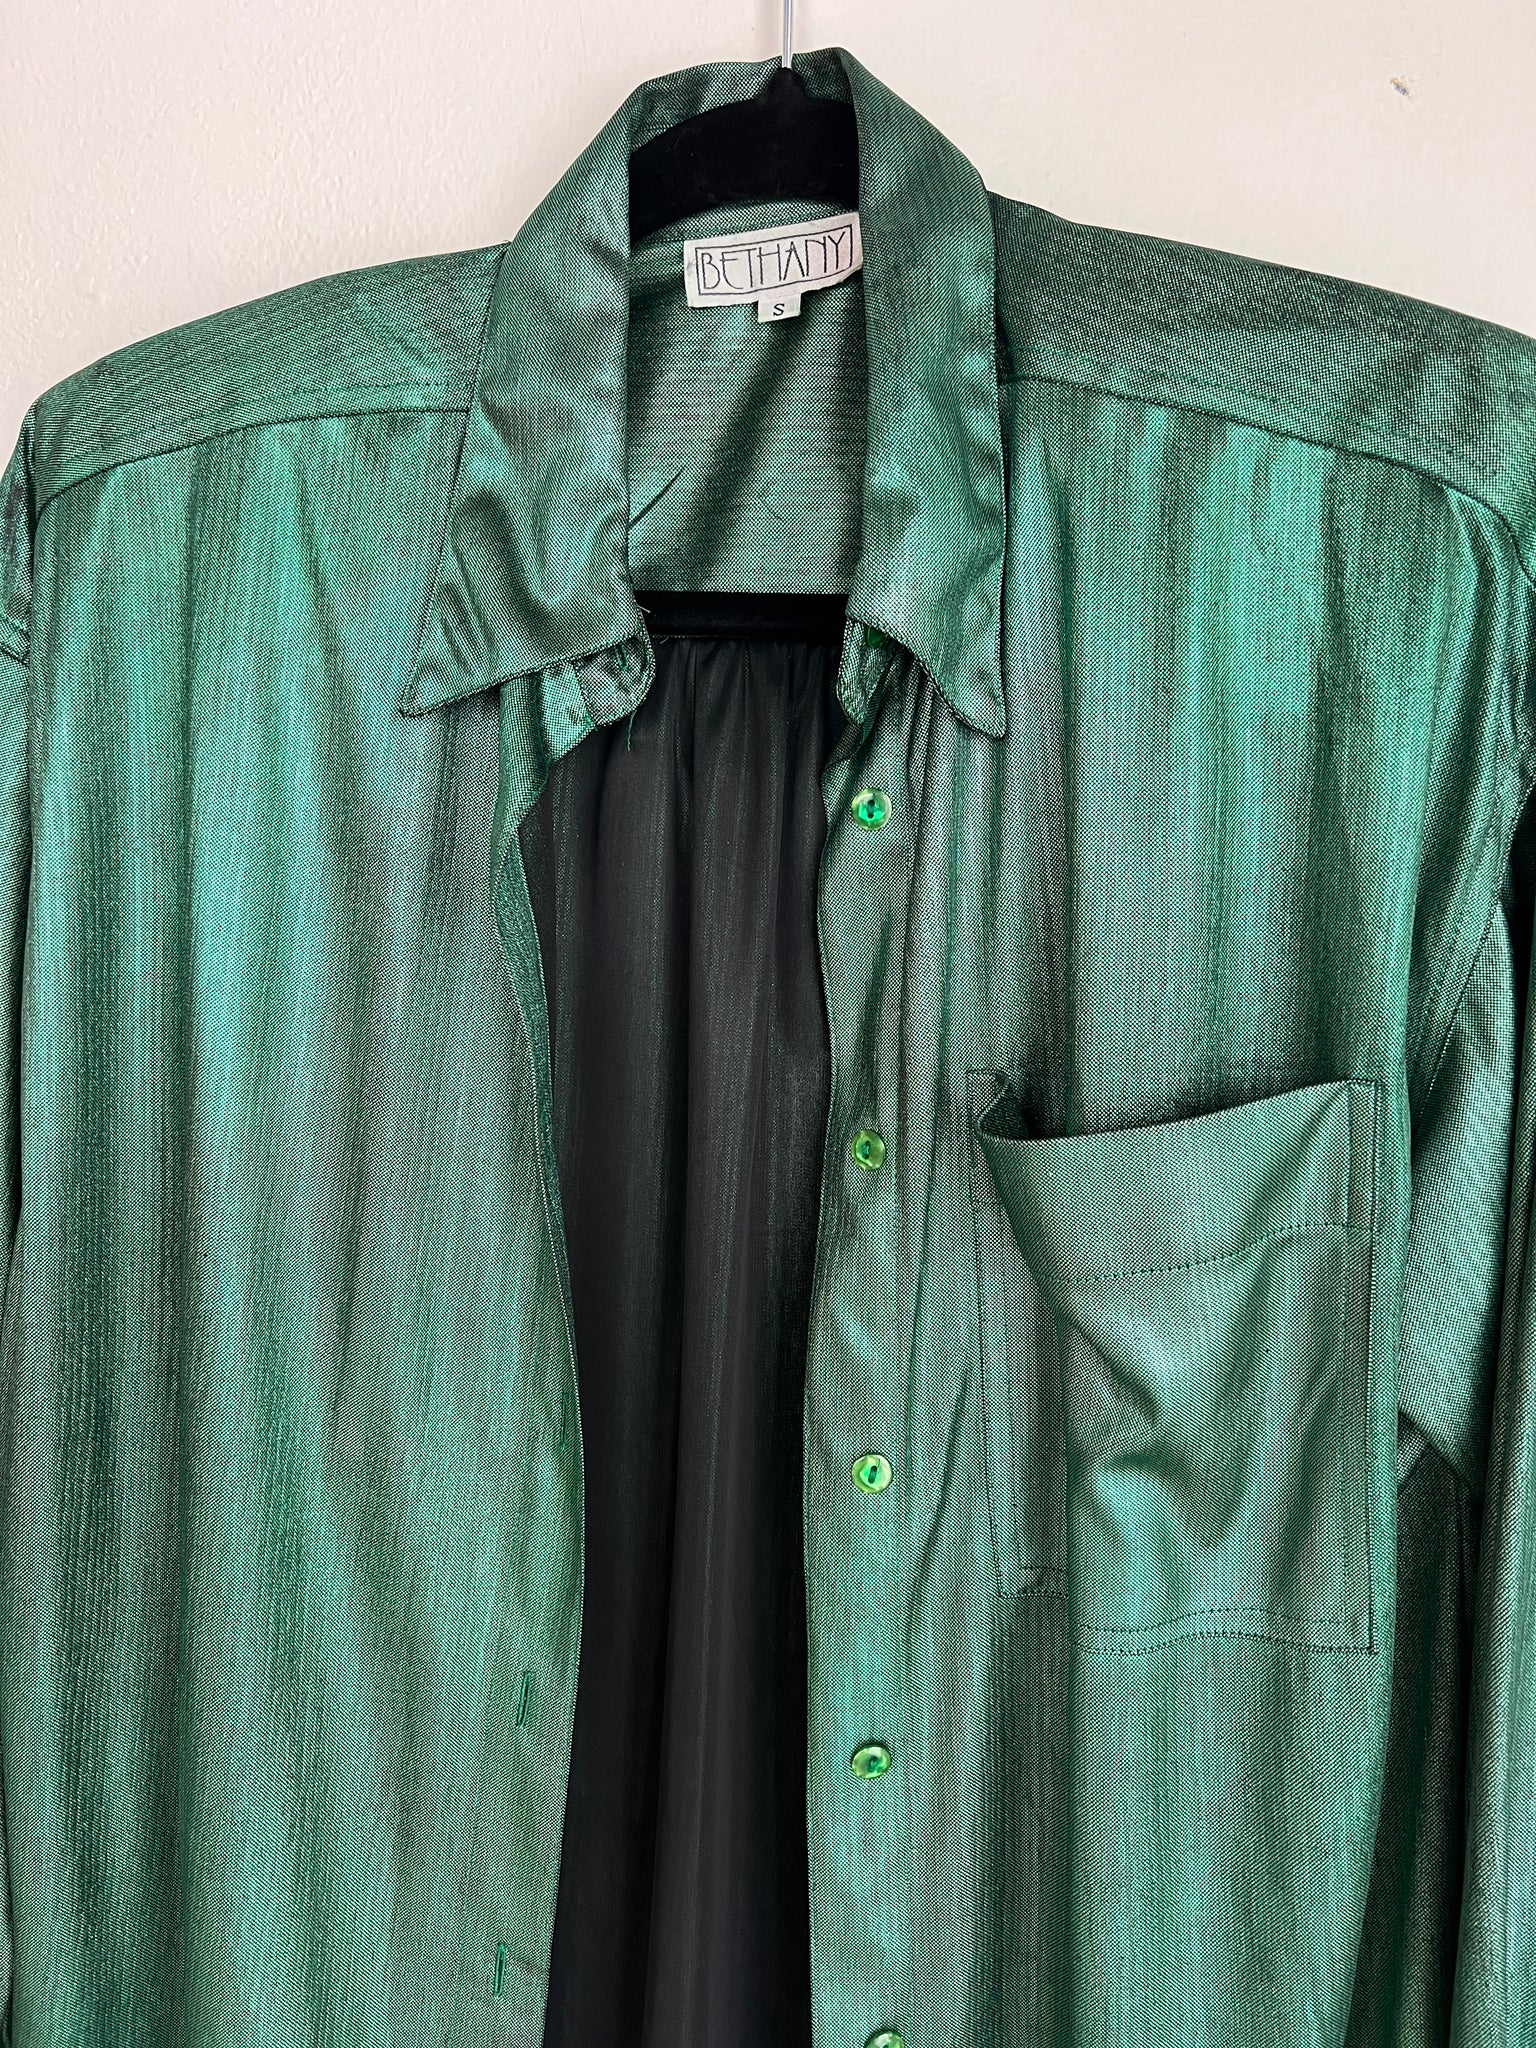 1990s TOP- Bethany green lame buttondown l/s